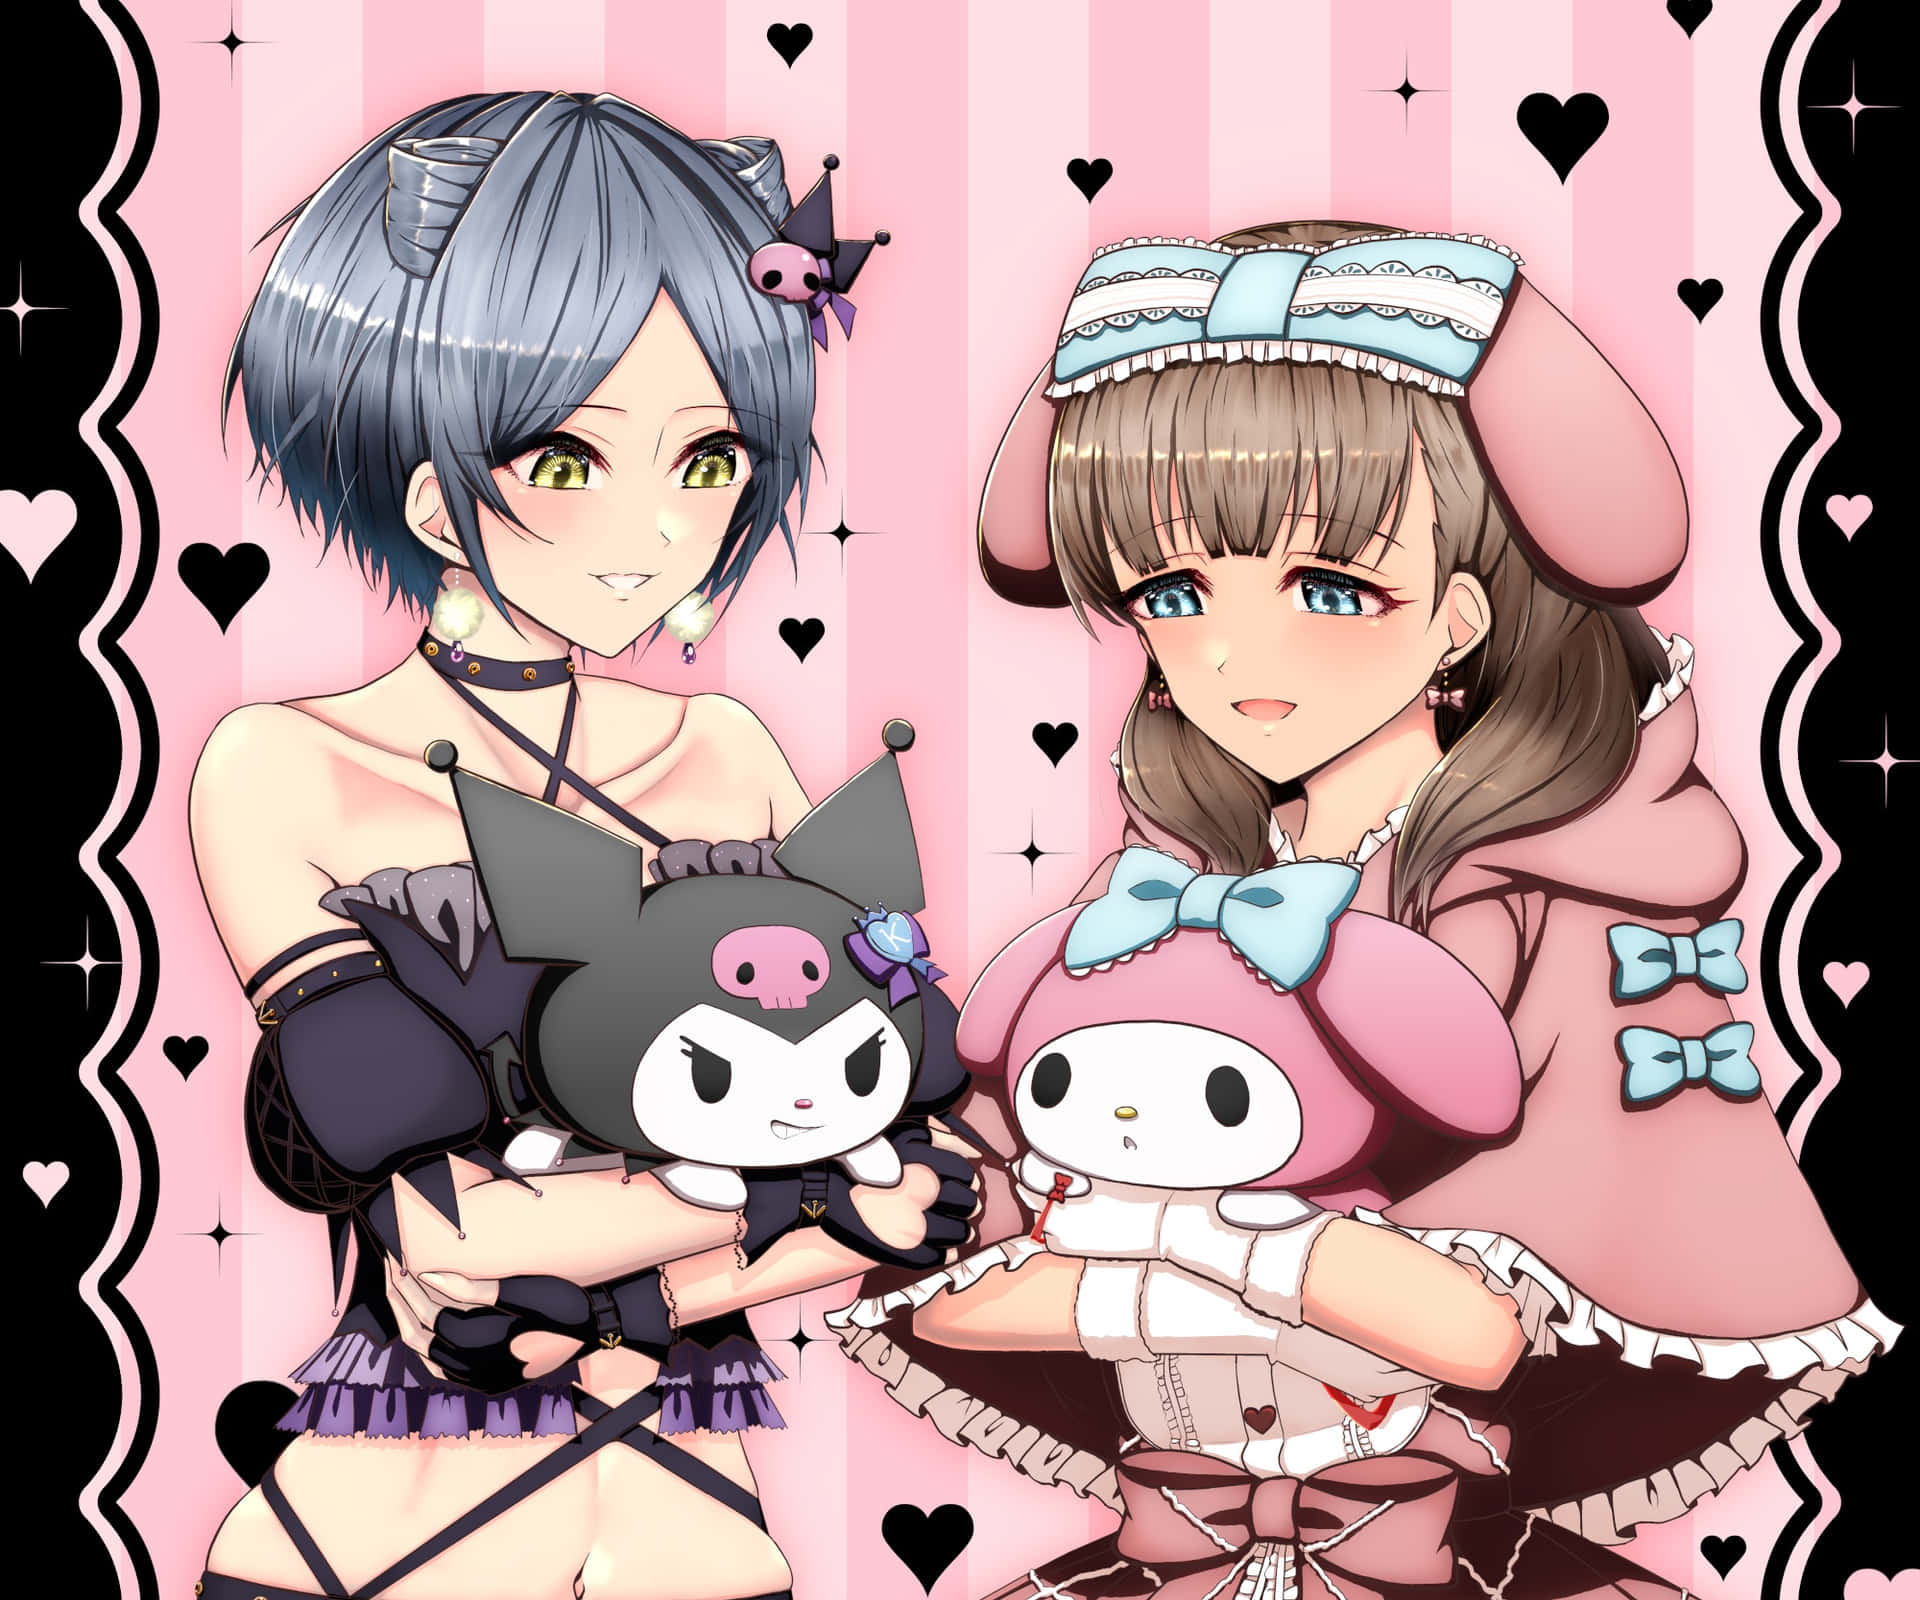 Kuromi and My Melody enjoying a sweet moment together. Wallpaper